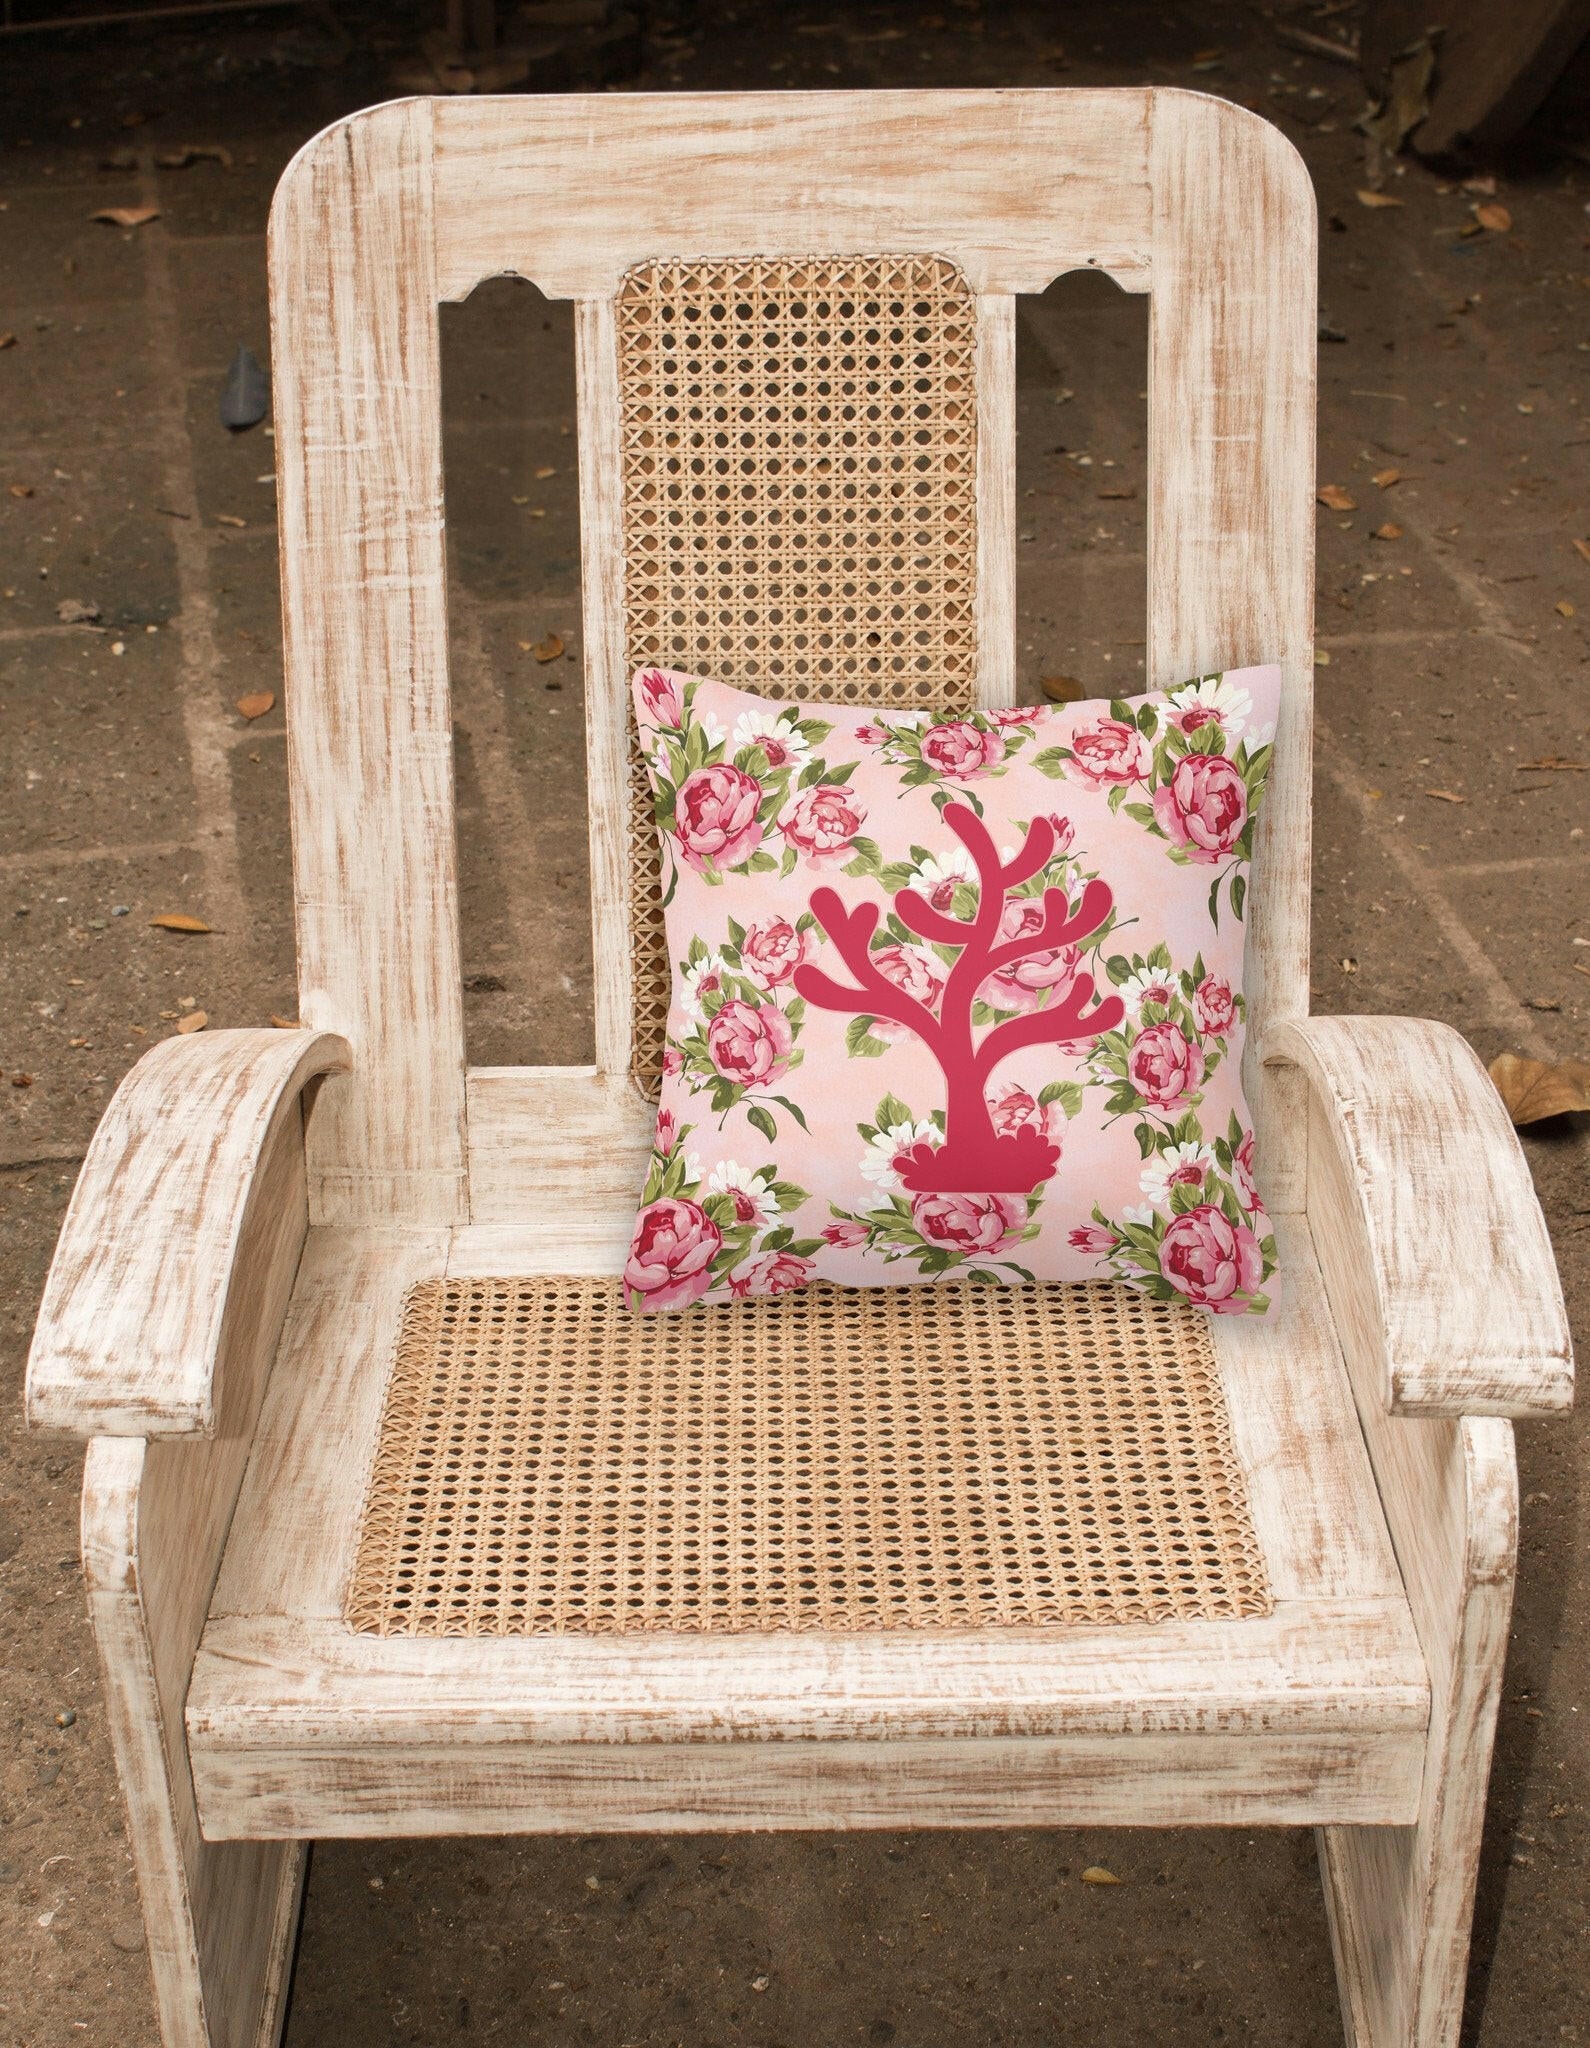 Coral Shabby Chic Pink Roses  Fabric Decorative Pillow BB1101-RS-PK-PW1414 - the-store.com